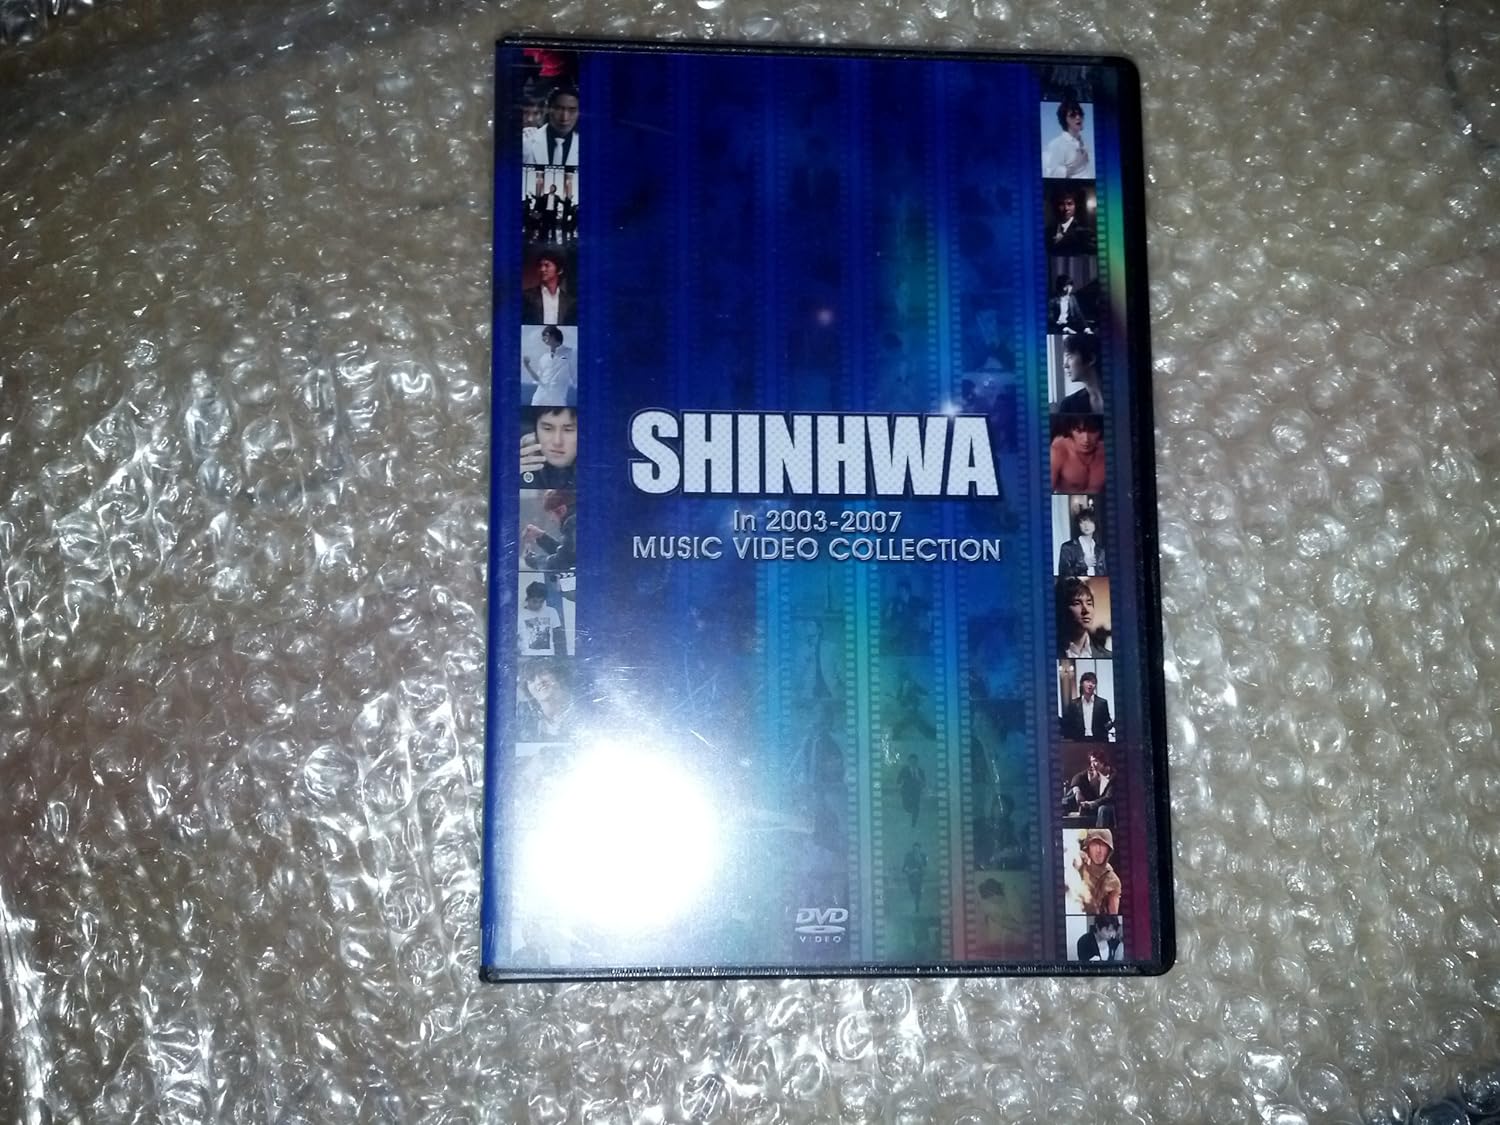 SHINHWA in 2003-2007 MUSIC VIDEO COLLECTION [DVD]